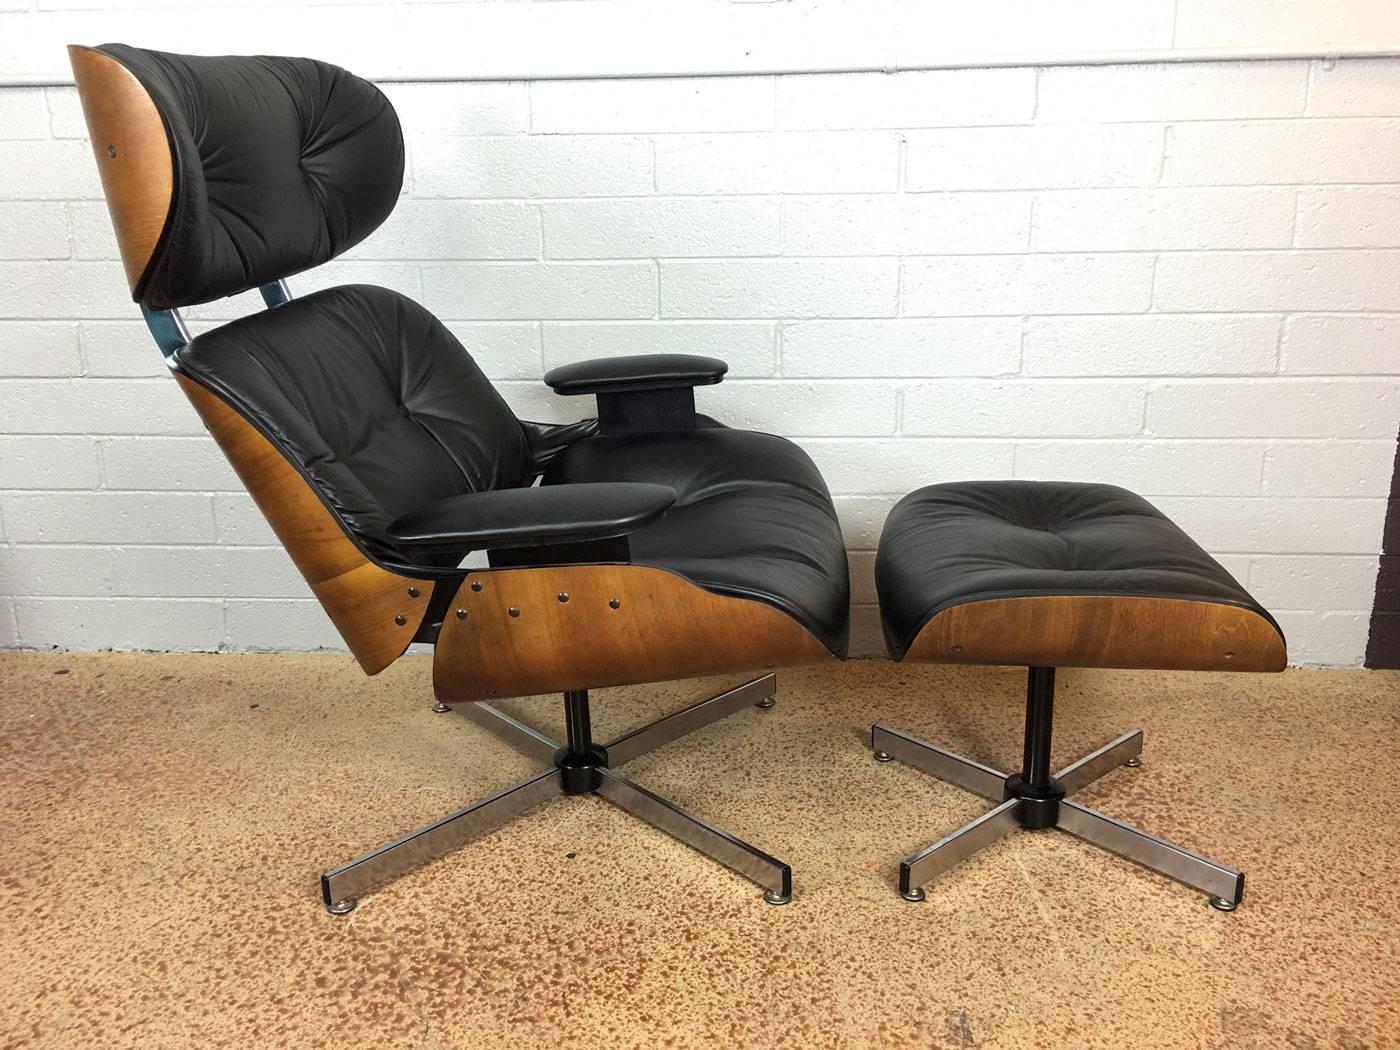 Plycraft leather lounge chair and ottoman. Walnut. Four star base on chair and ottoman, circa 1970s. 

Dimensions: 39